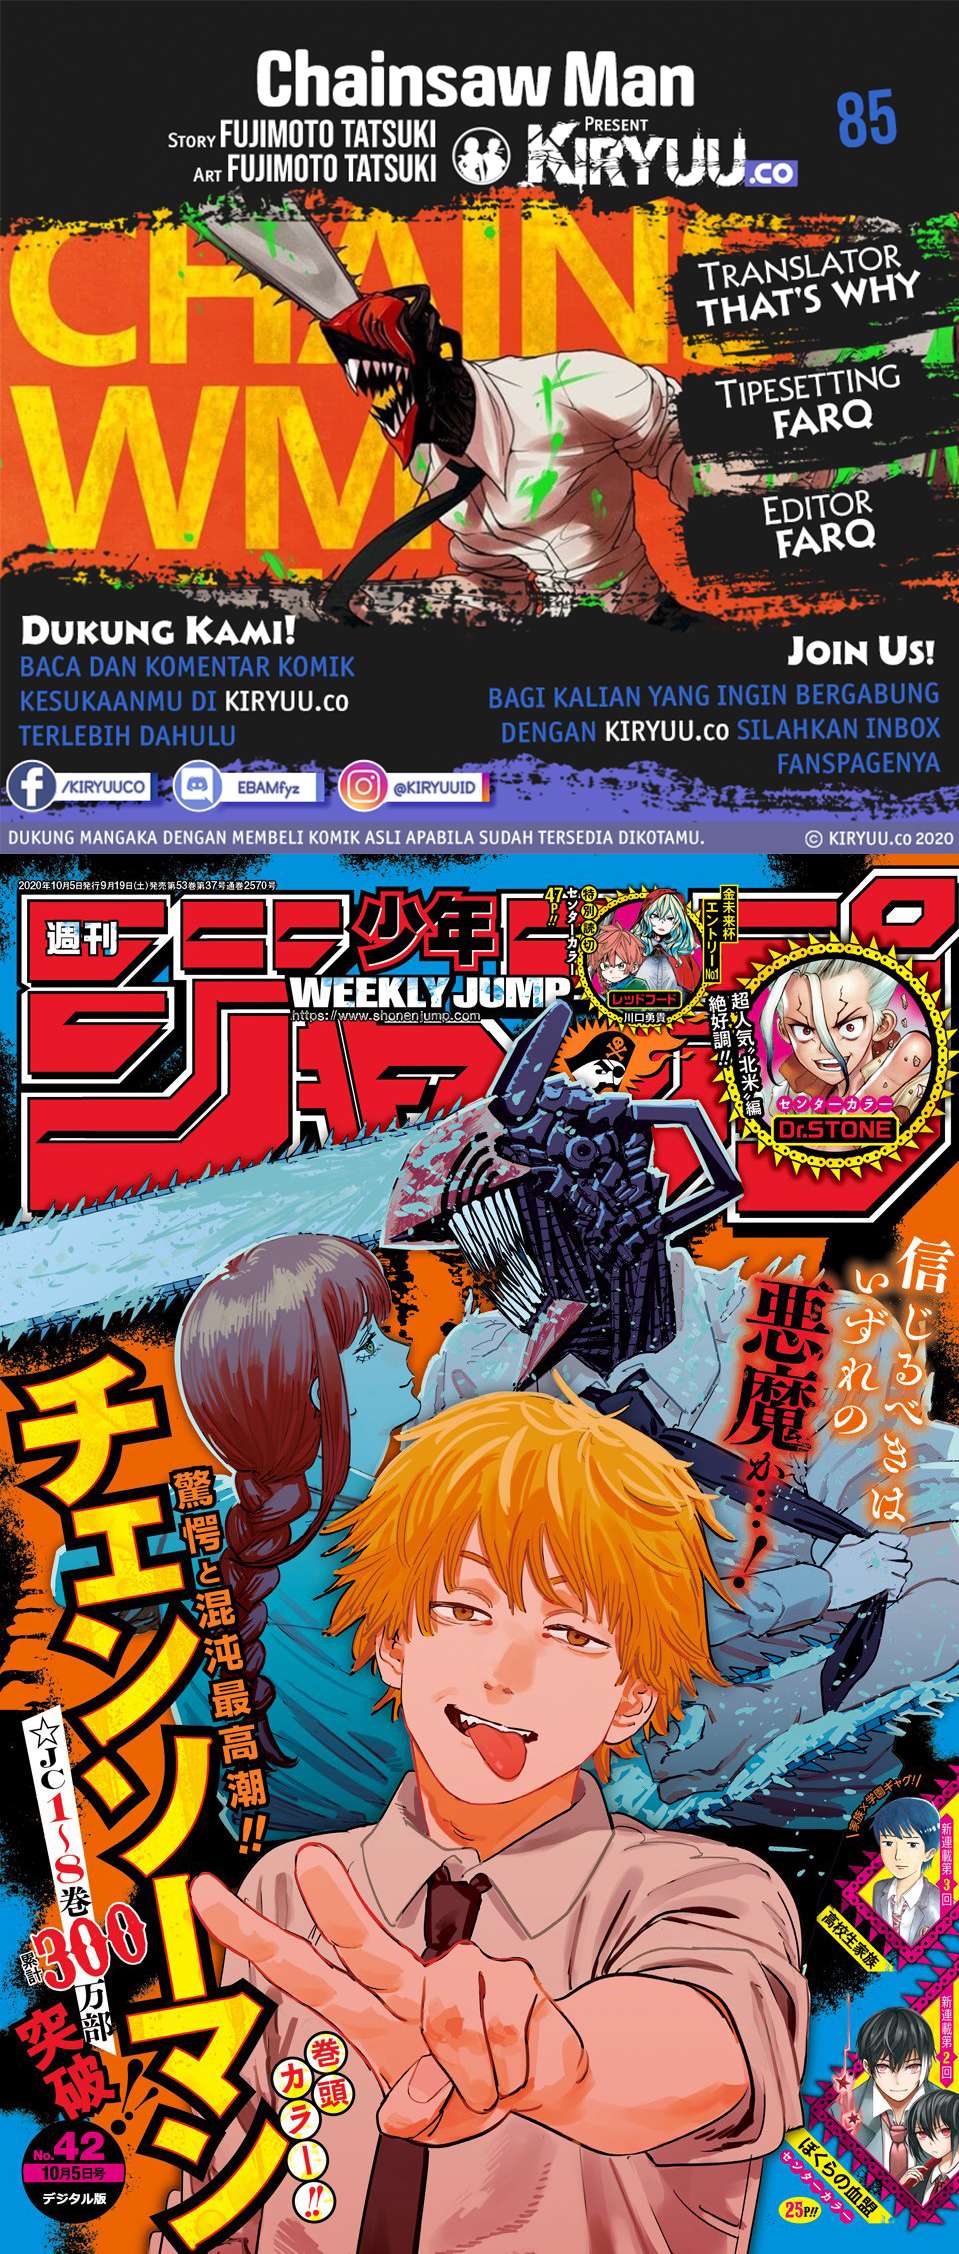 Chainsaw Man Chapter 85 - 153